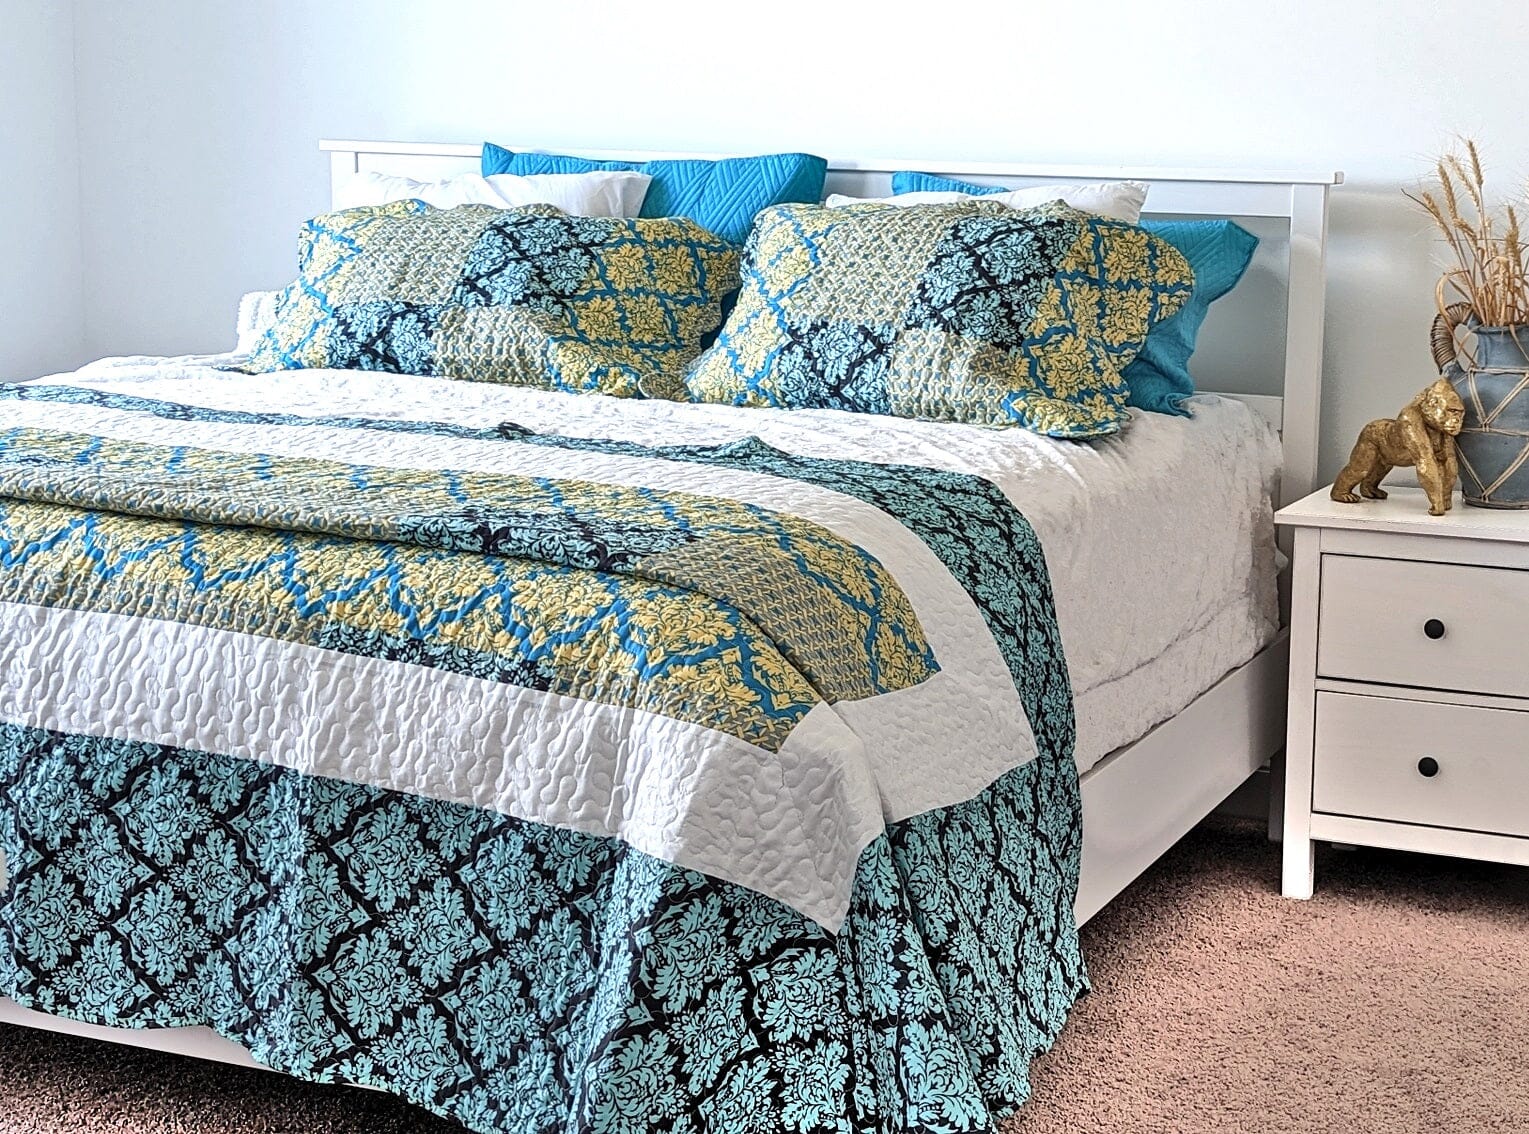 A quilt set with a damask pattern in teal, turquoise, and blue. The quilt is made of 100% polyester and has a scalloped edge. The set includes a quilt, two shams, and a bed skirt. The quilt is machine-washable and tumble-dryable.  The quilt set would be a great addition to any bedroom. The damask pattern is elegant and sophisticated, while the teal, turquoise, and blue colors are vibrant and inviting. The quilt set is also comfortable and cozy, making it perfect for a good night's sleep.